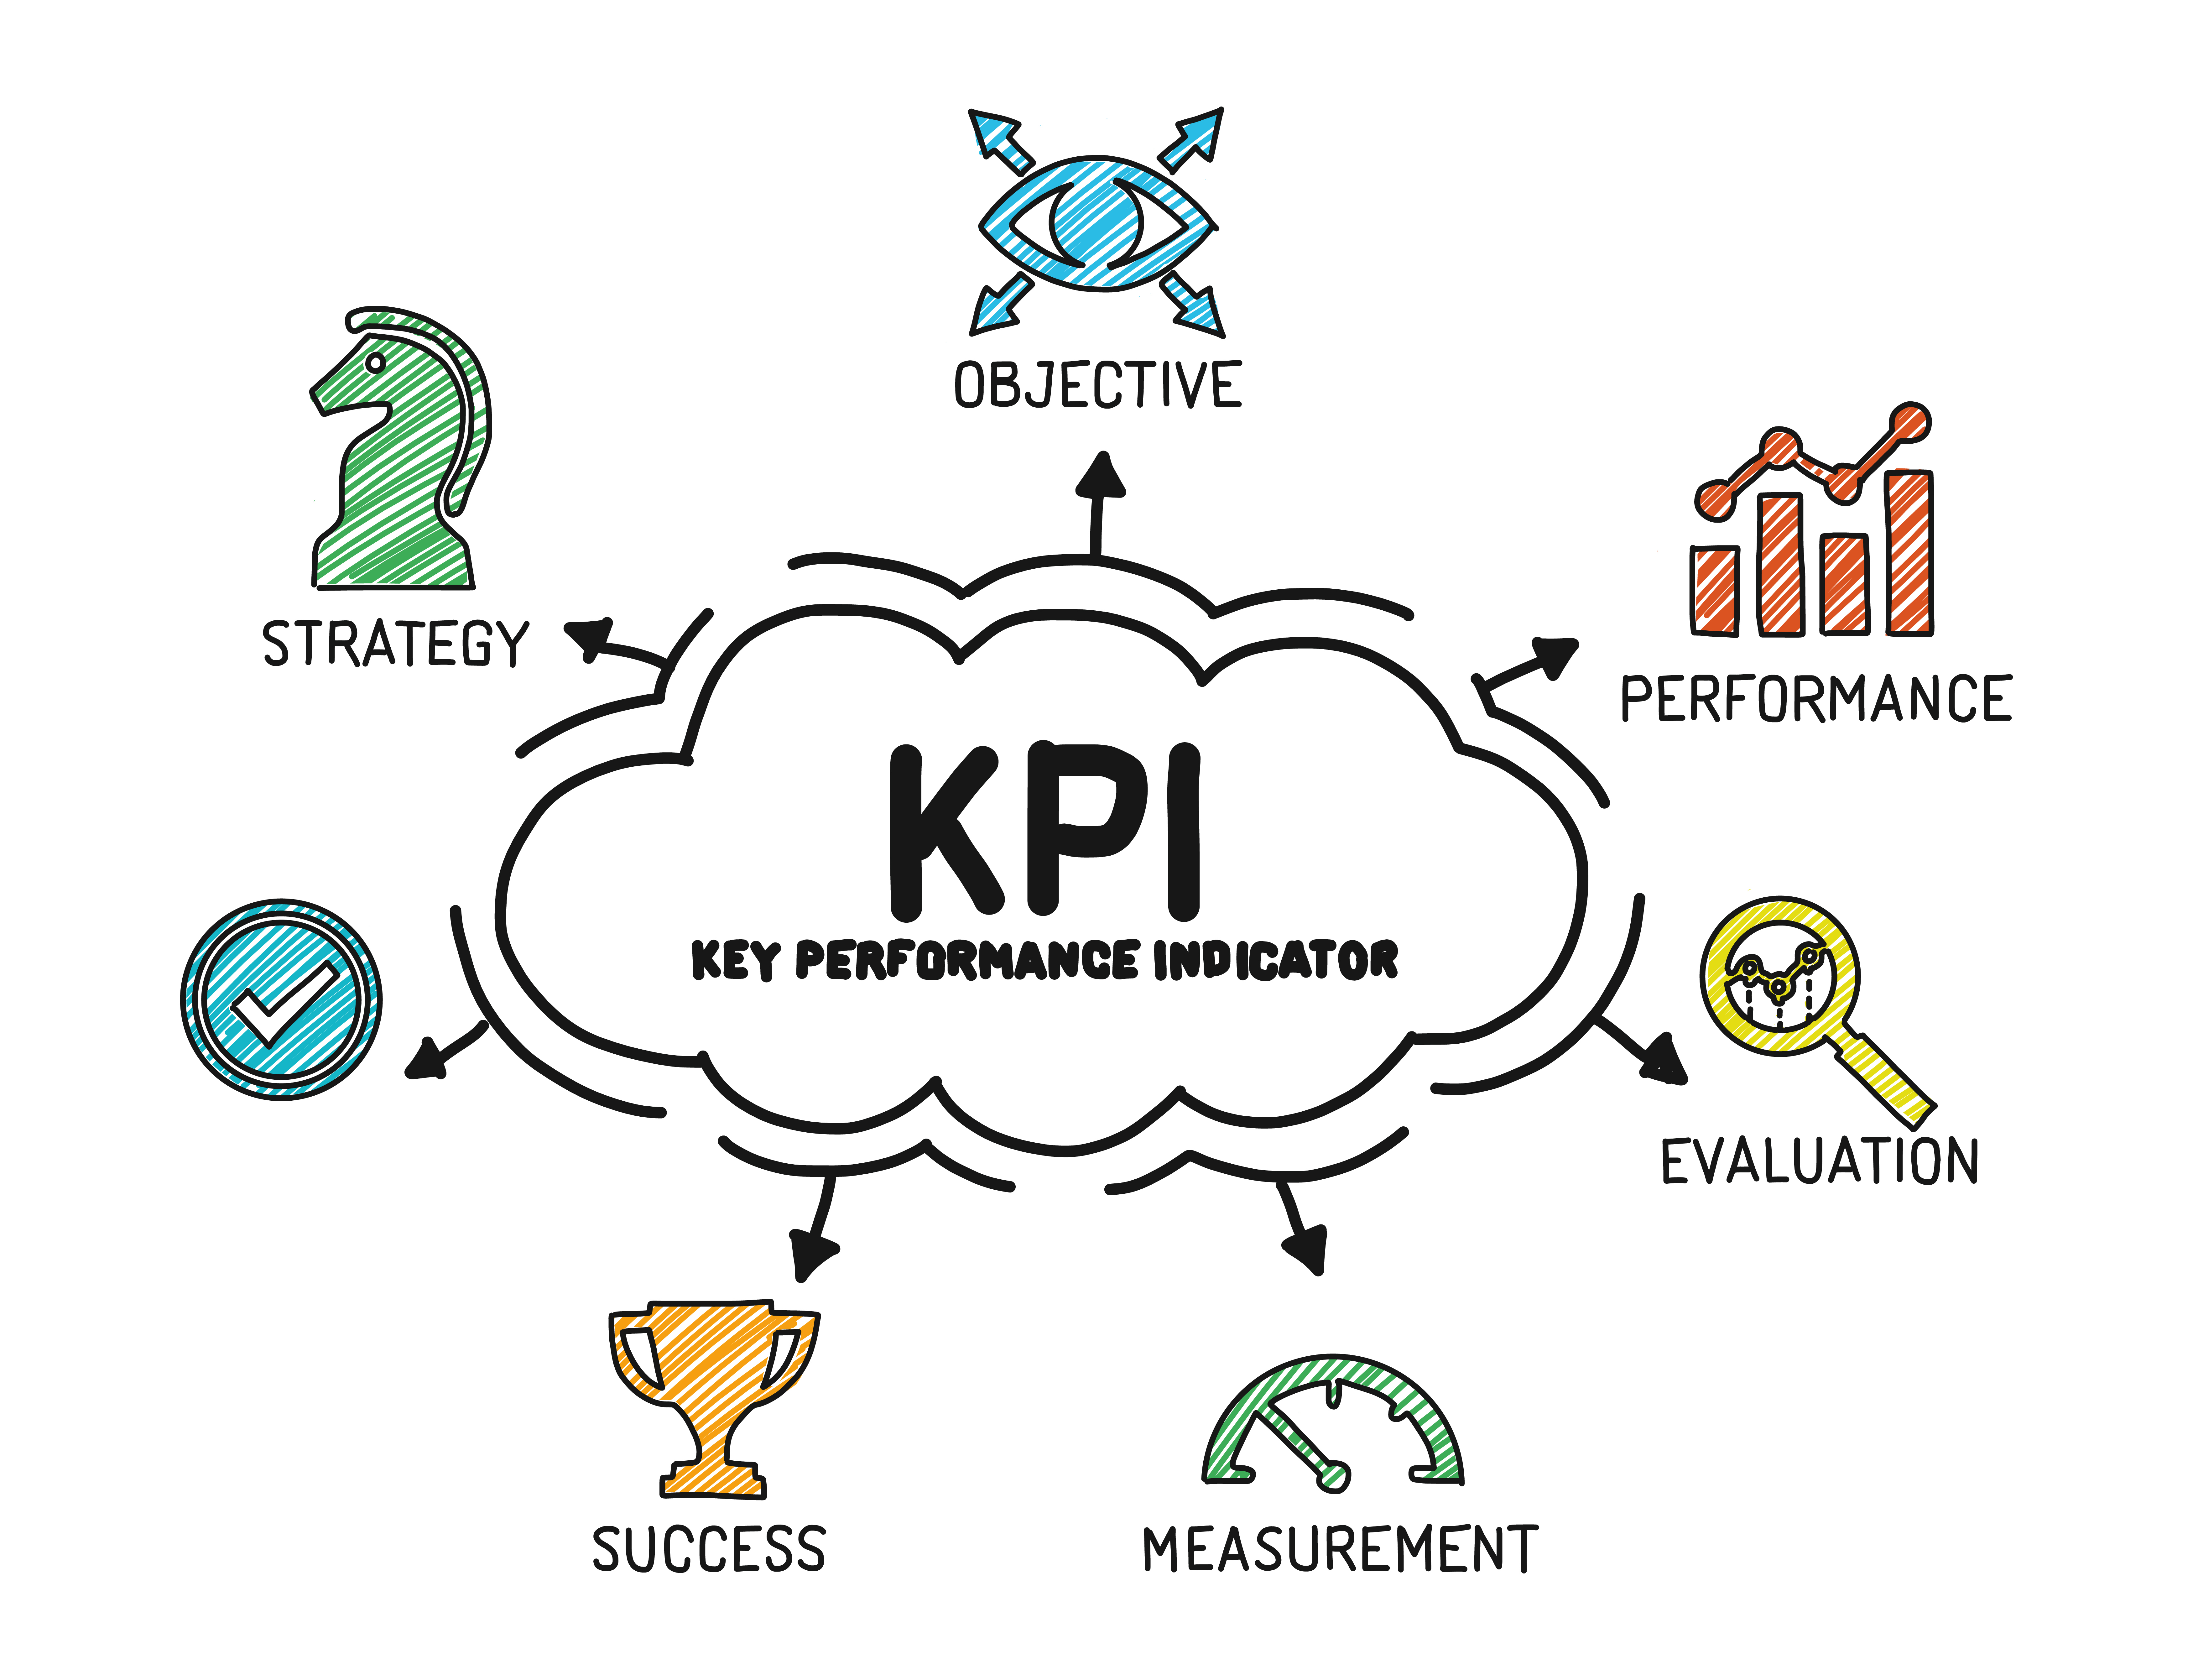 16039 KPI Key Performance Indicator. Chart with keywords and icons - Sketch.jpg